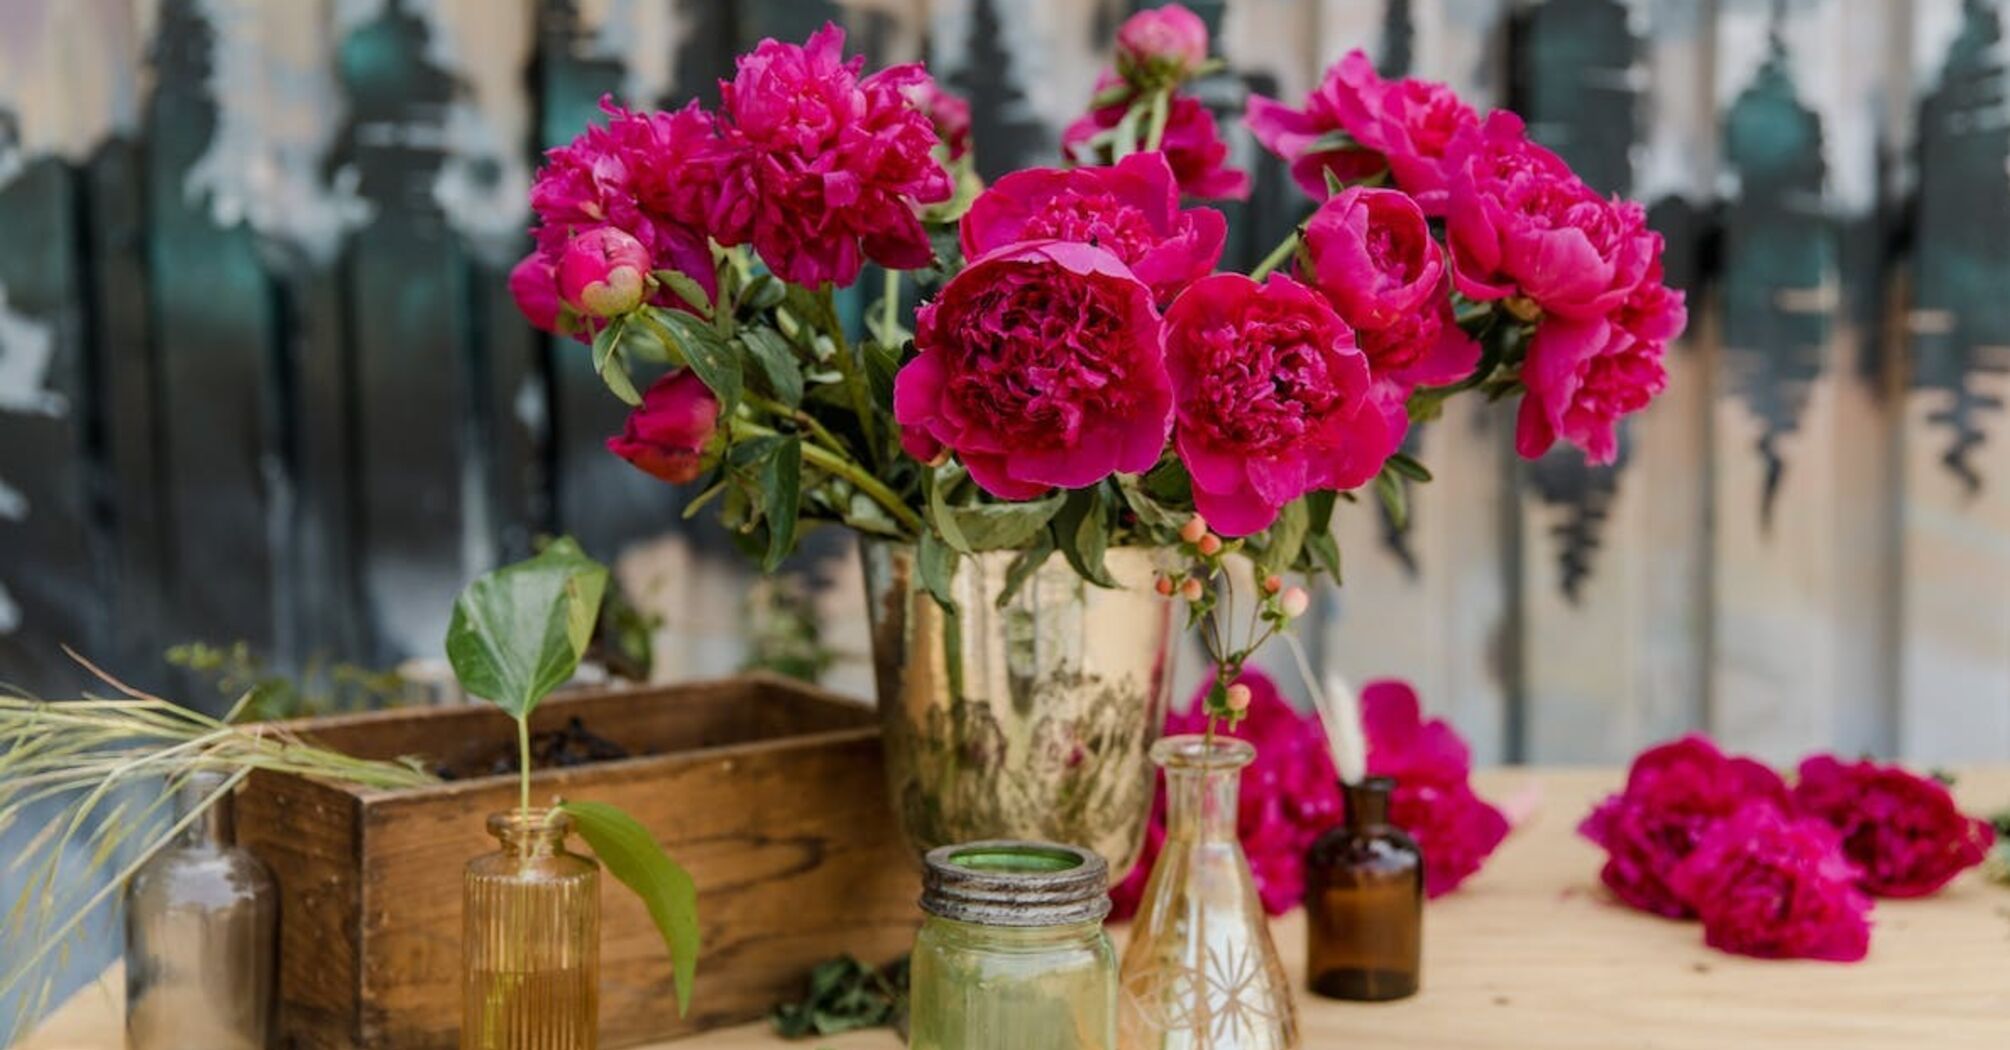 Flowers in a vase will last a long time thanks to alcohol and vinegar: how to use a life hack